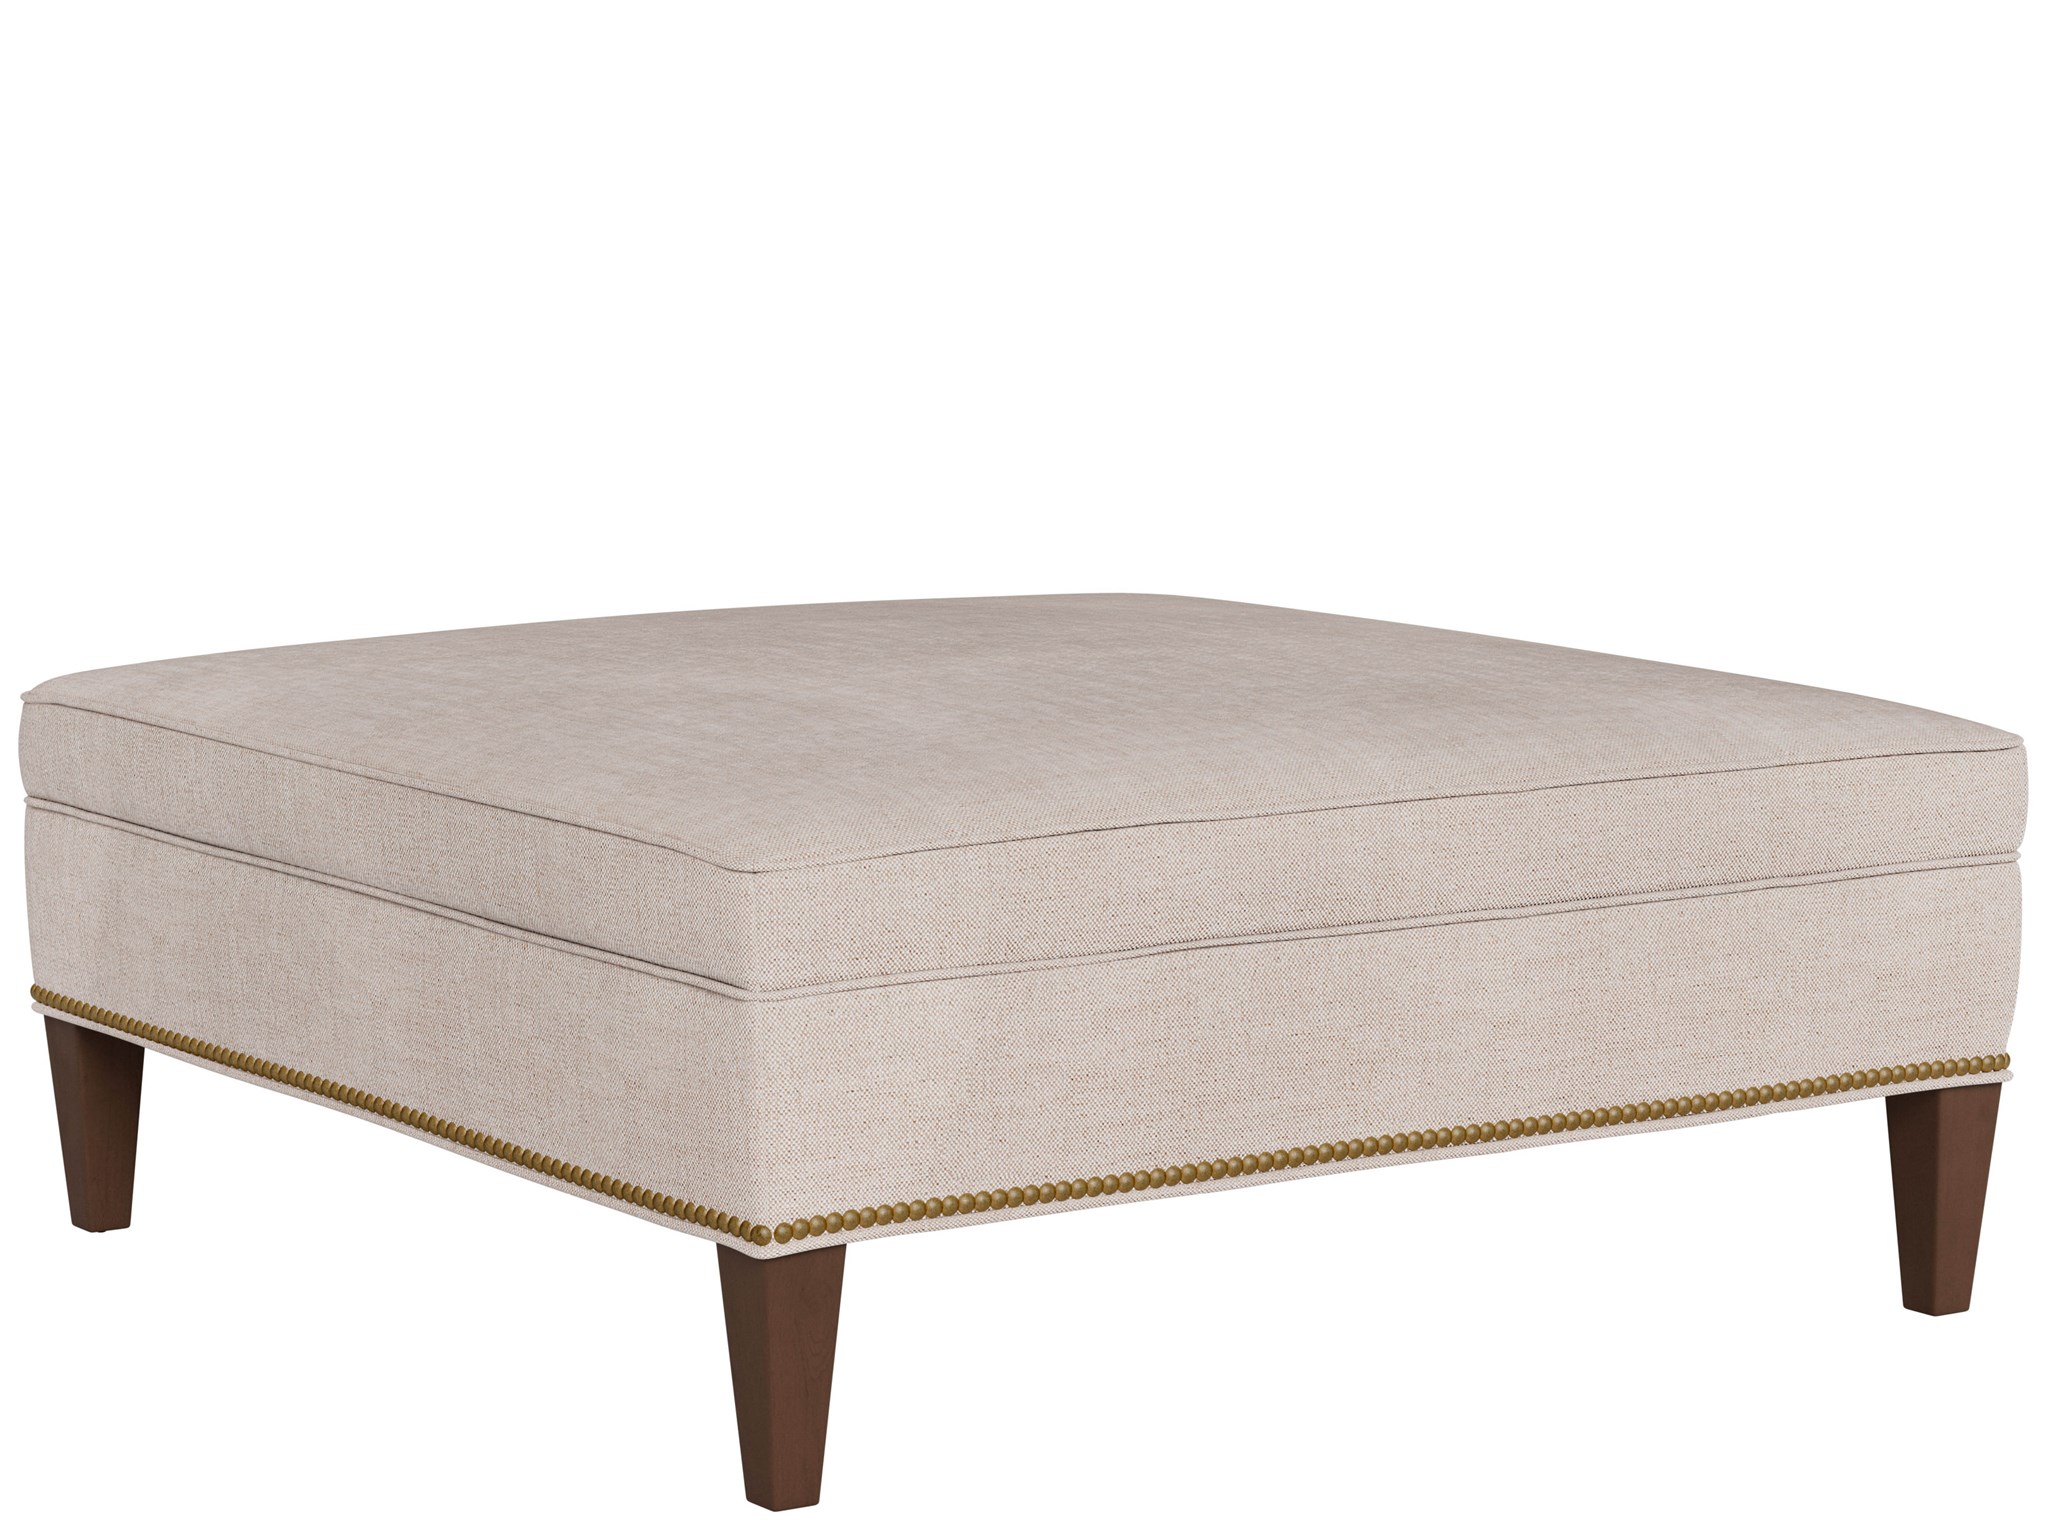 Loden Ottoman Square 42" - Special Order